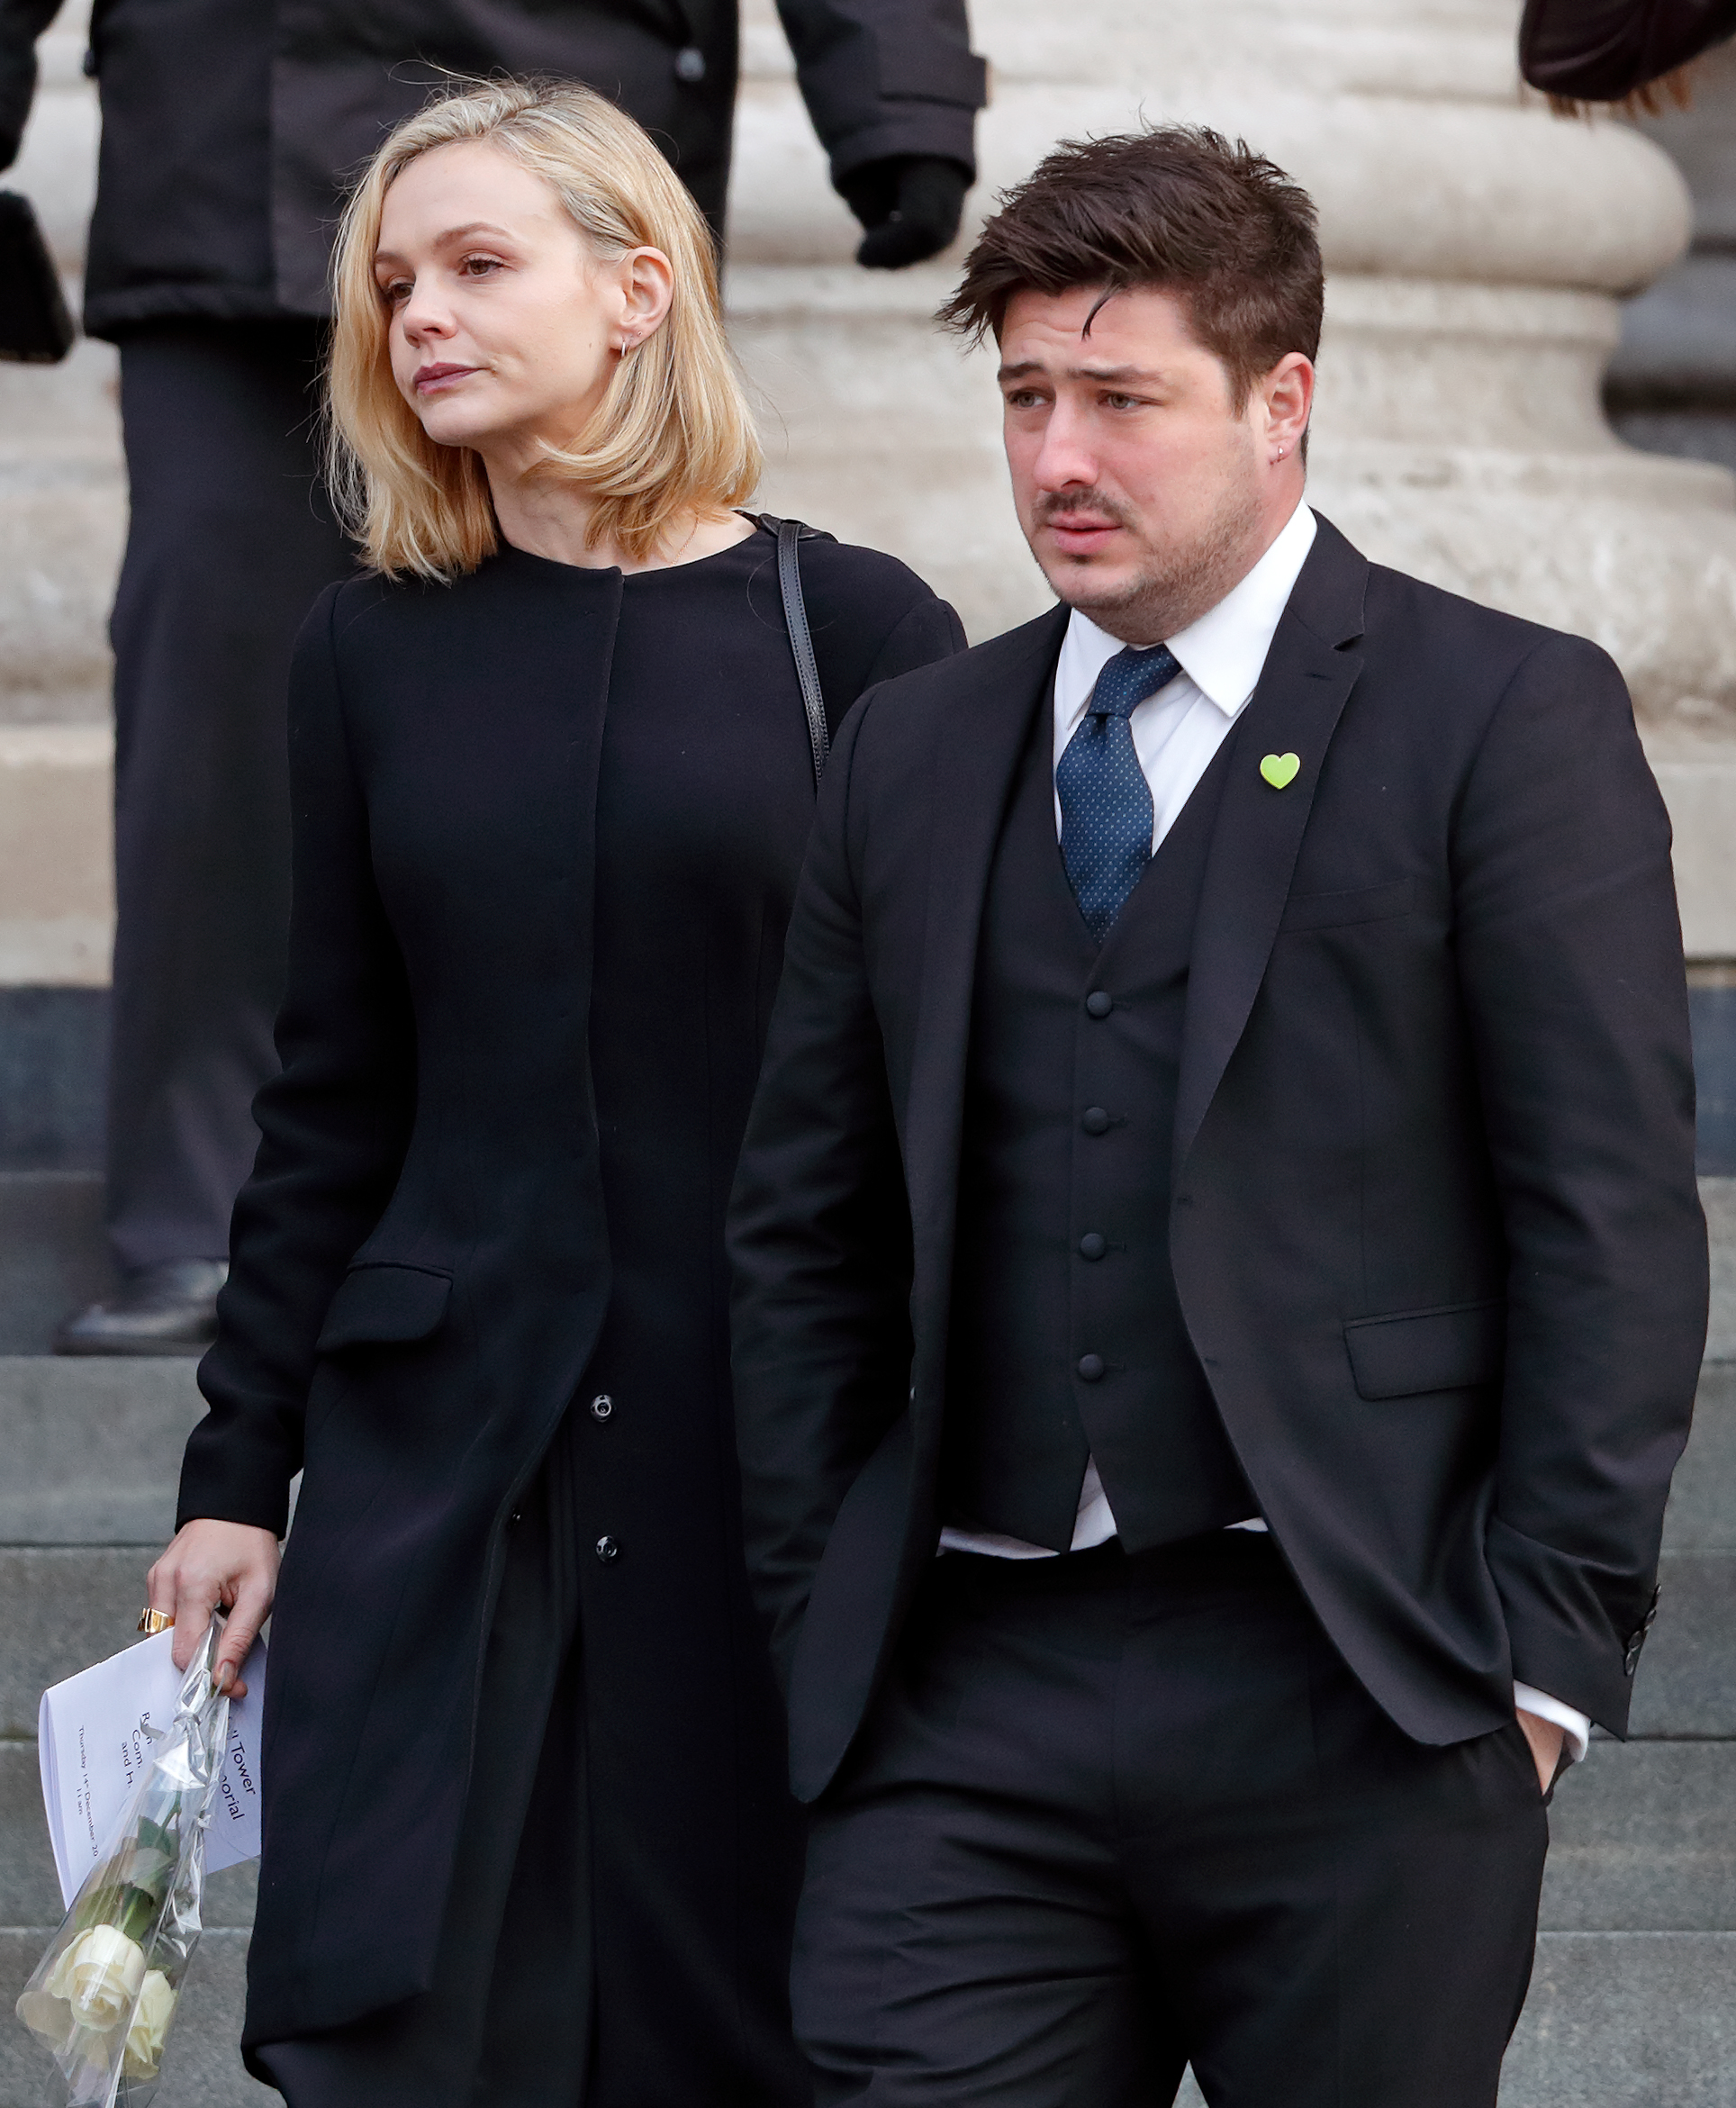 Carey Mulligan and Marcus Mumford attend the Grenfell Tower national memorial service at St Paul's Cathedral on December 14, 2017, in London, England | Source: Getty Images